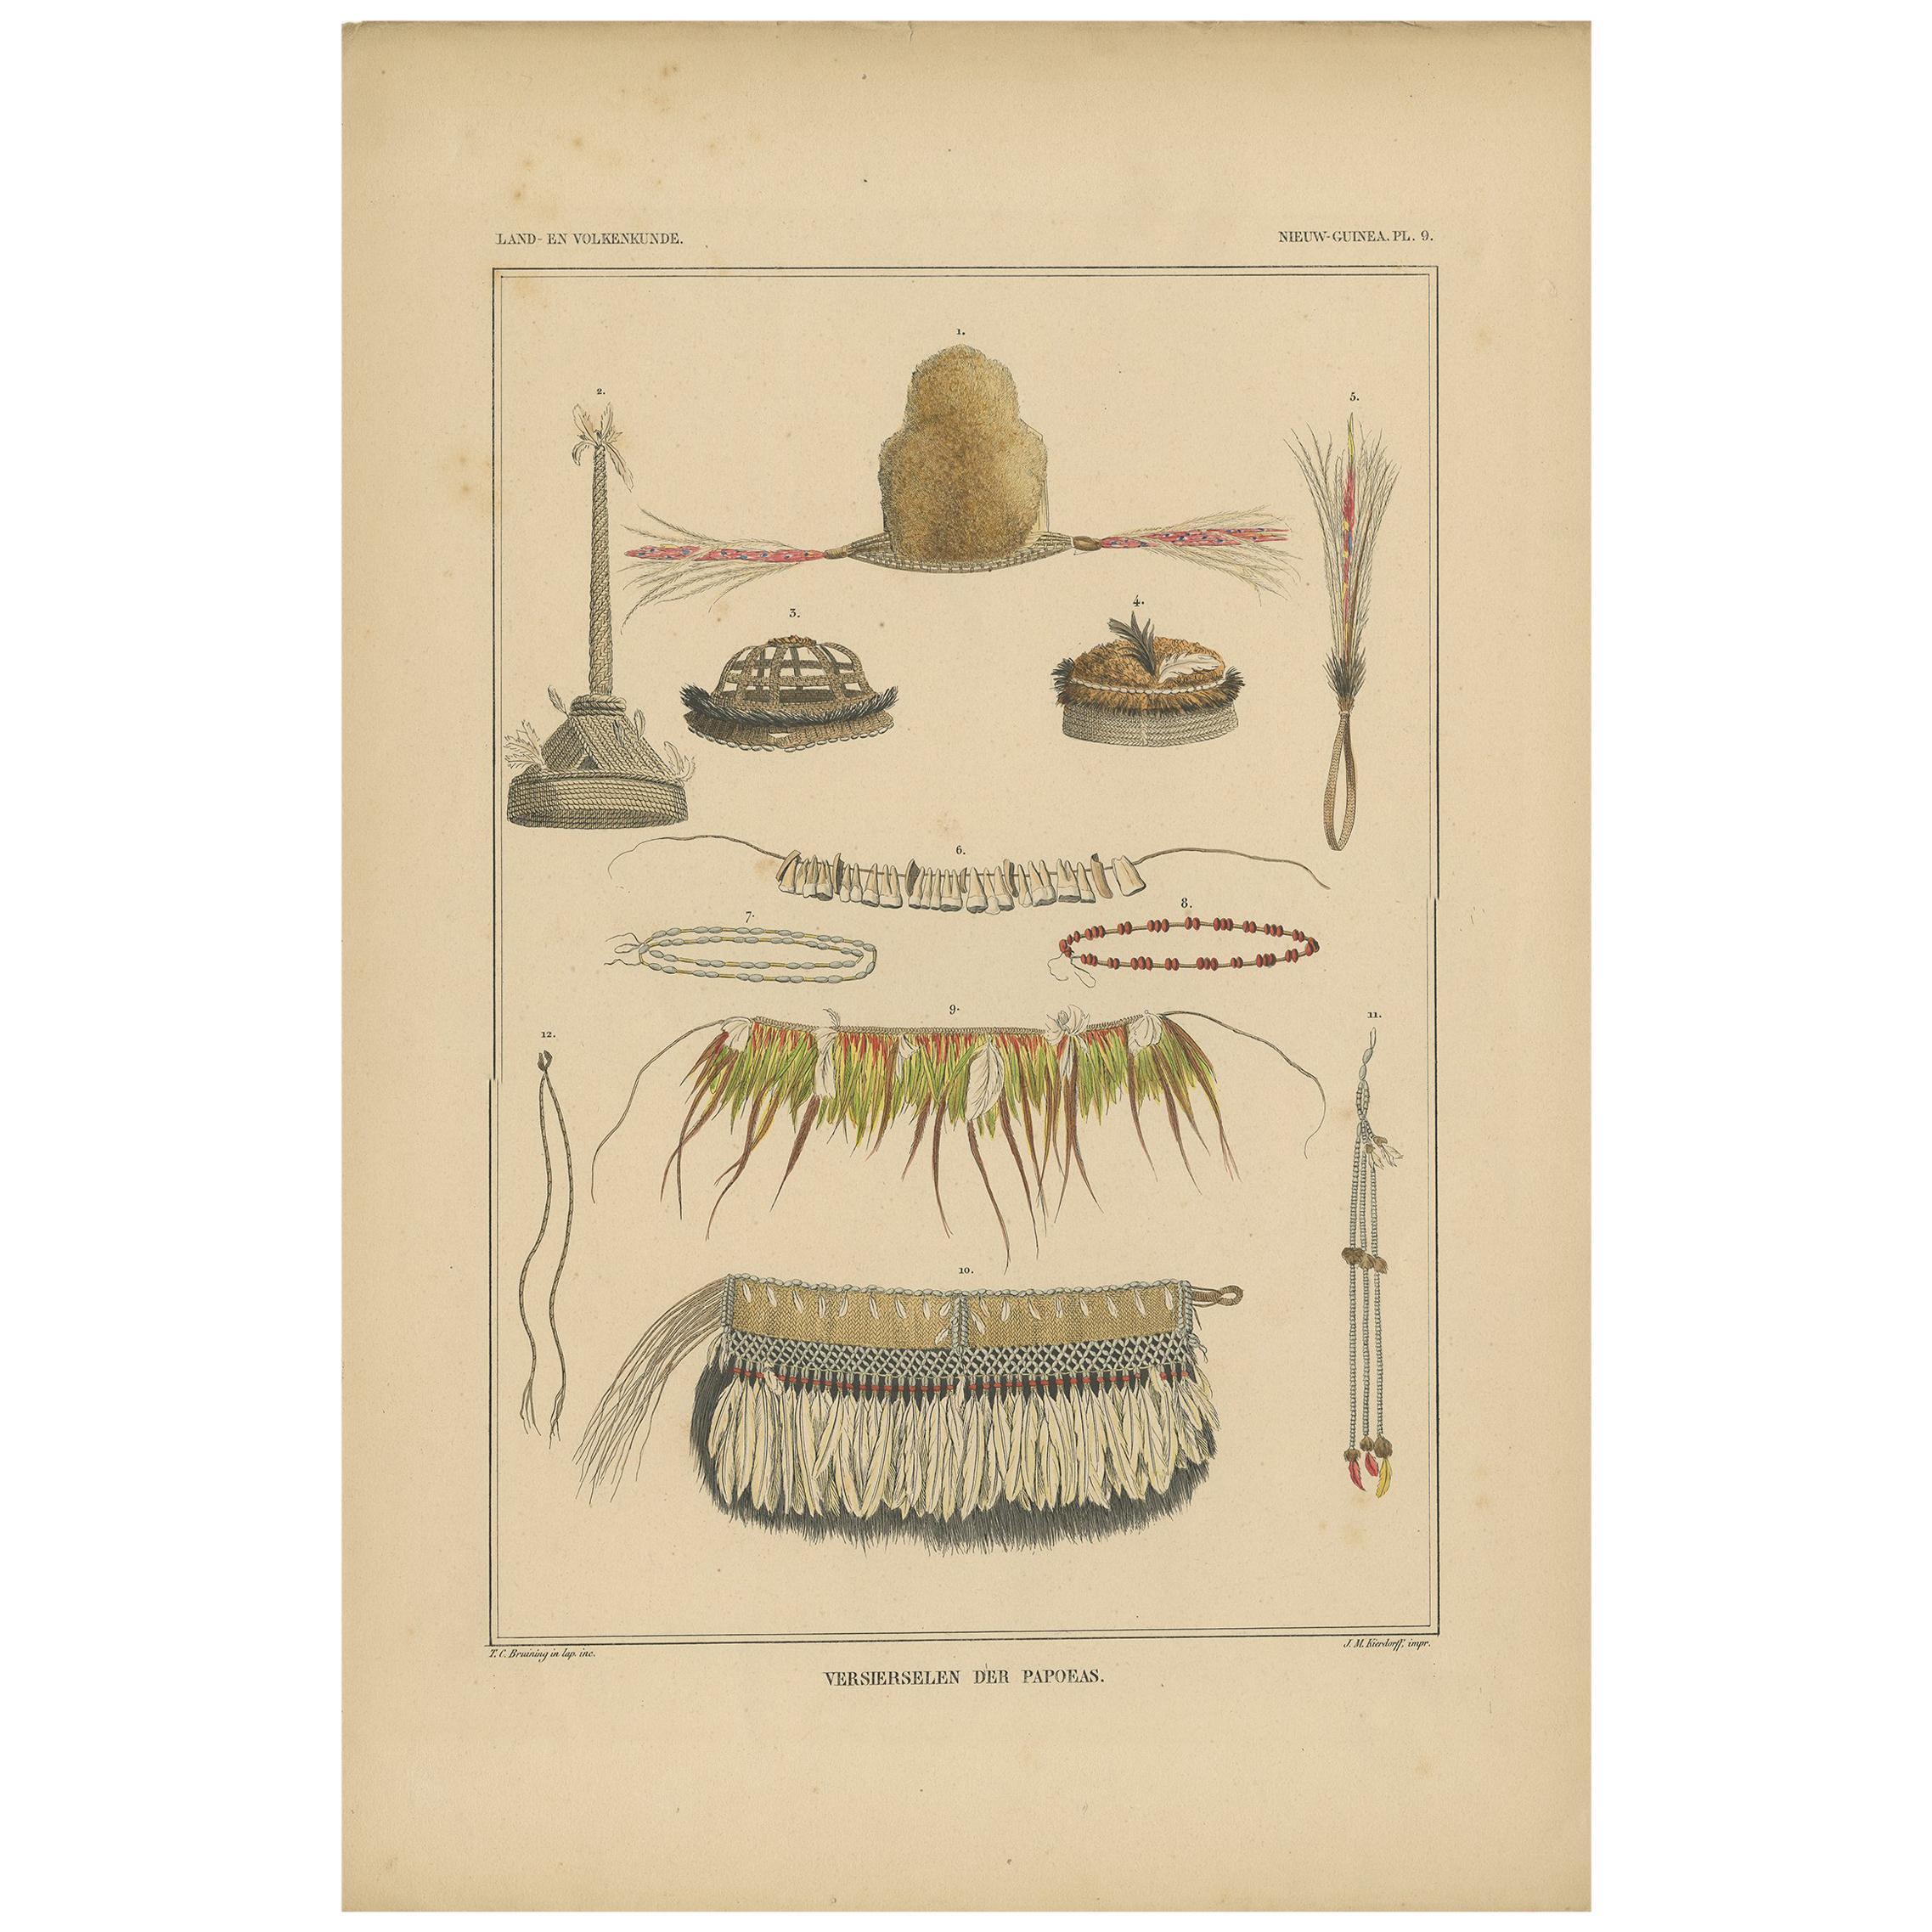 Print with Papua Decoration 'New Guinea, Indonesia' by Temminck, circa 1840